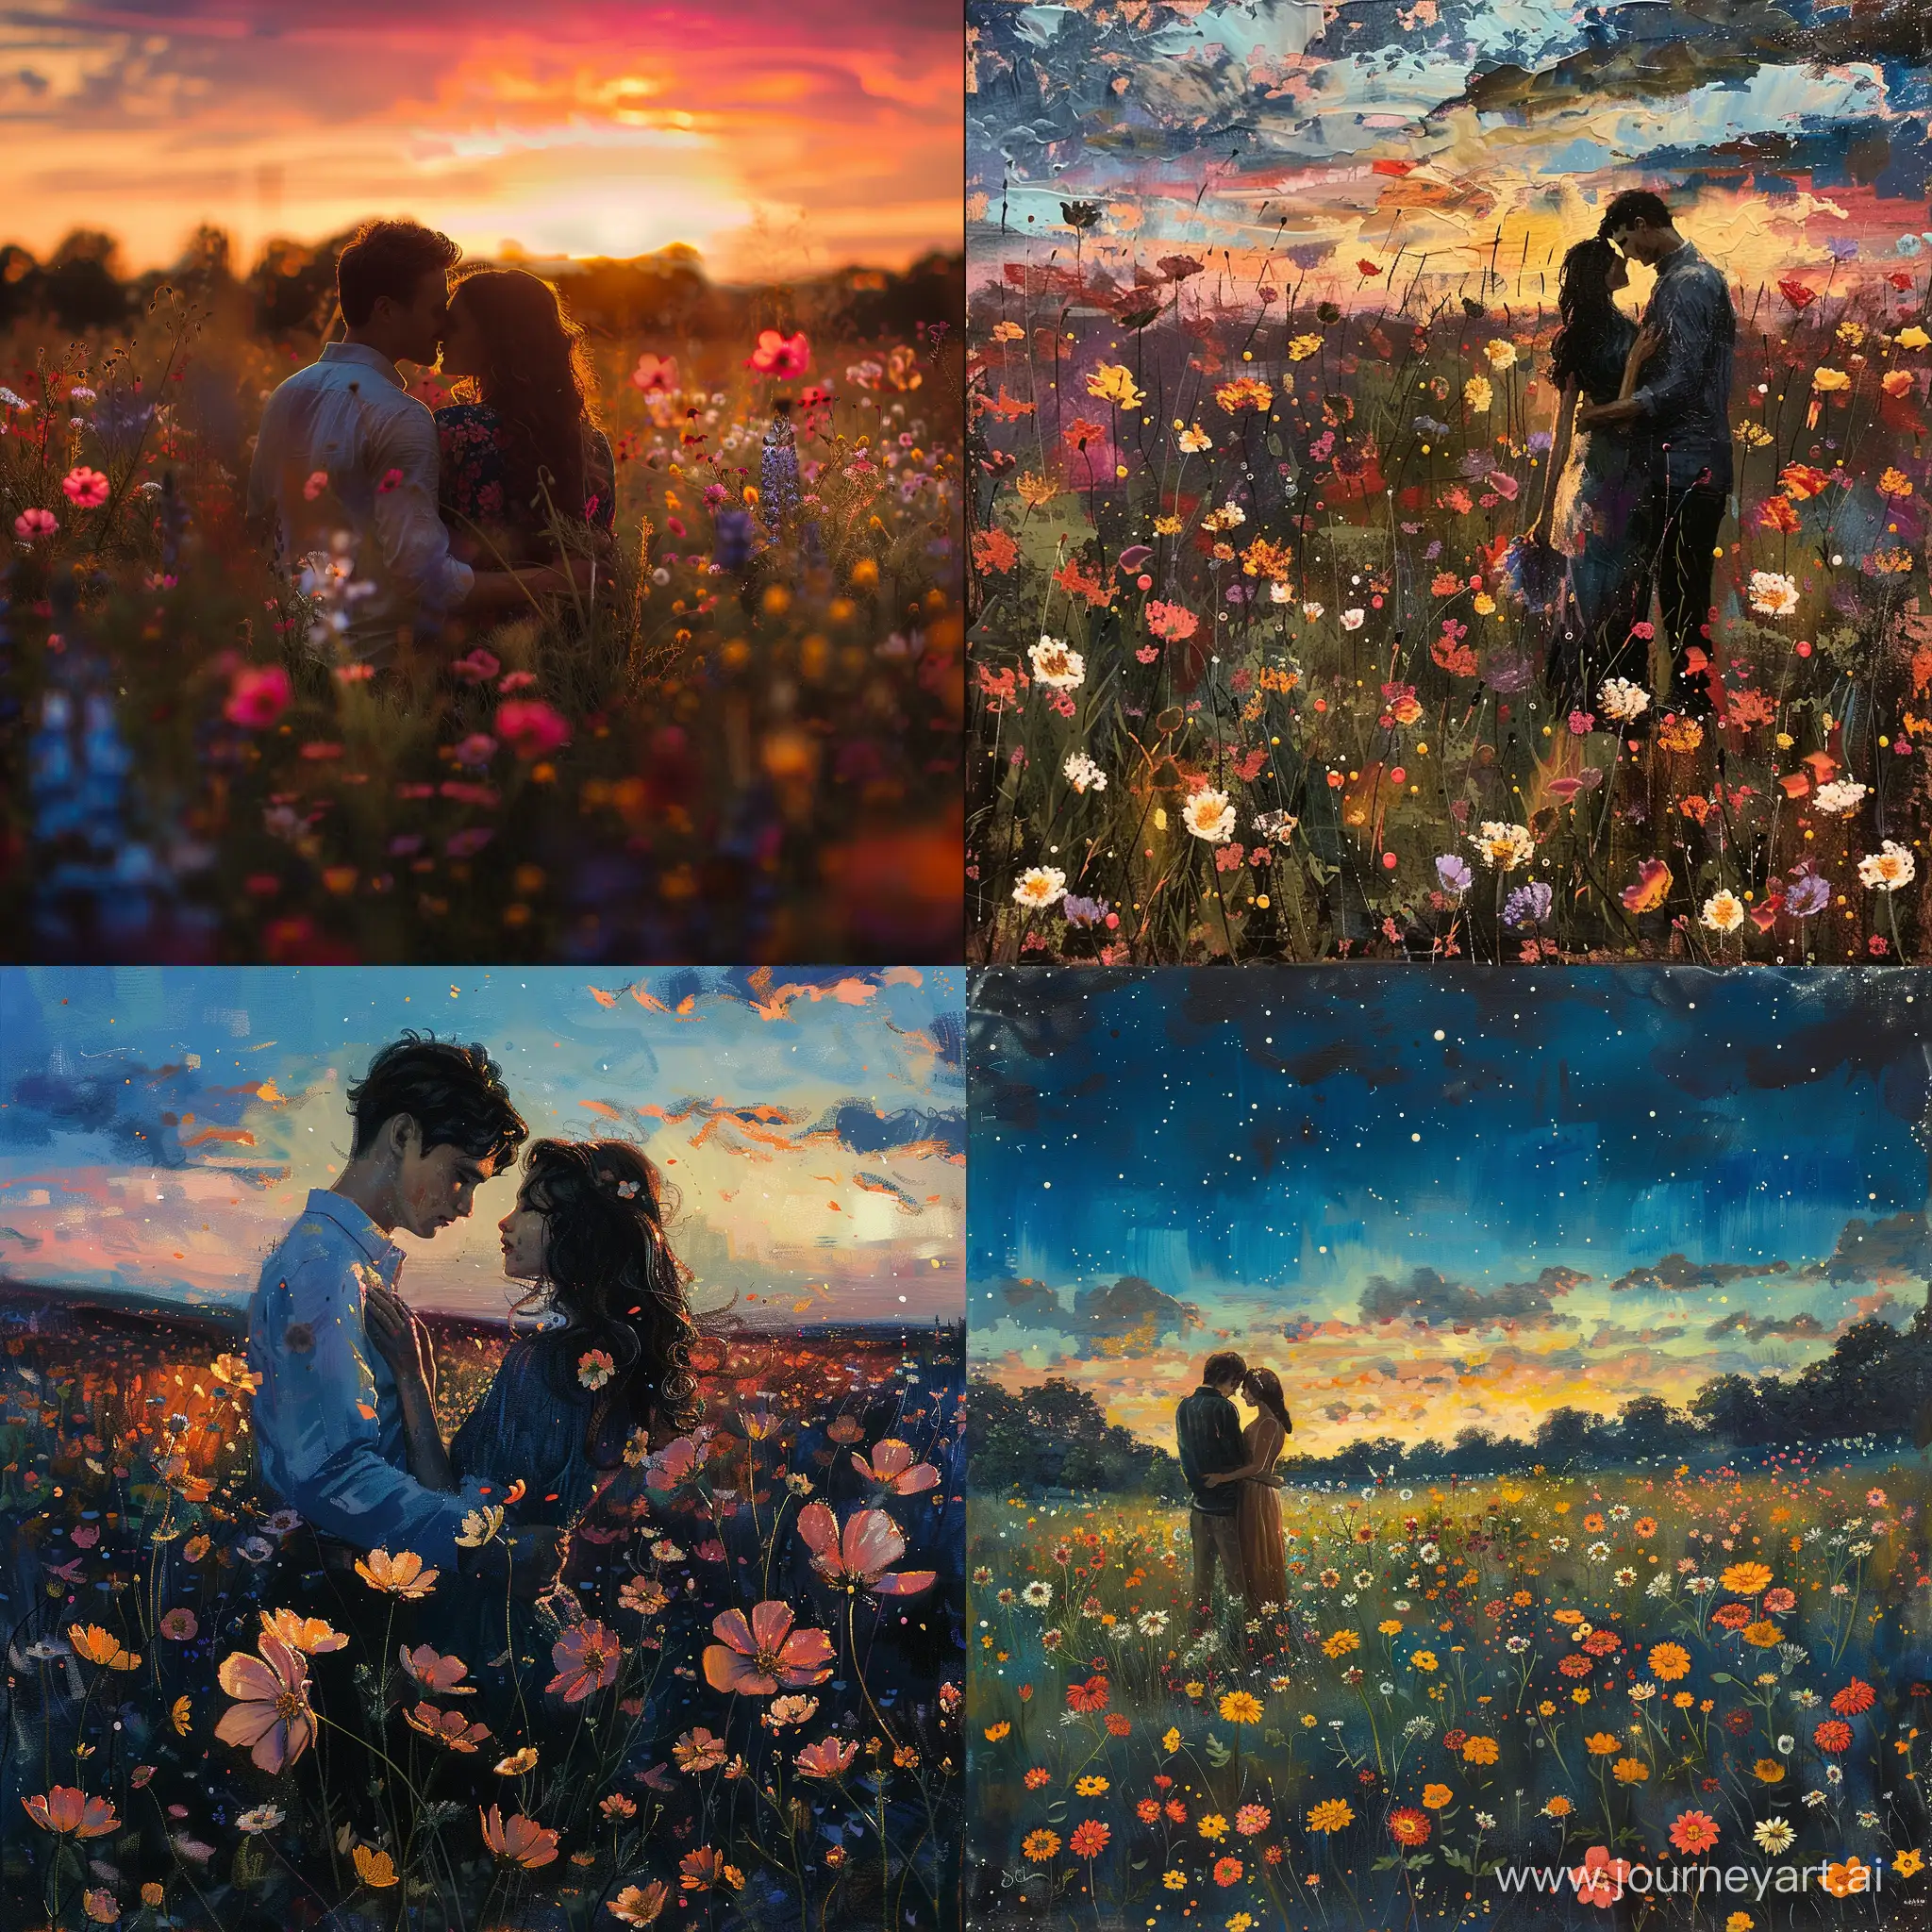 A love that is as comfortable as a field of flowers in the evening